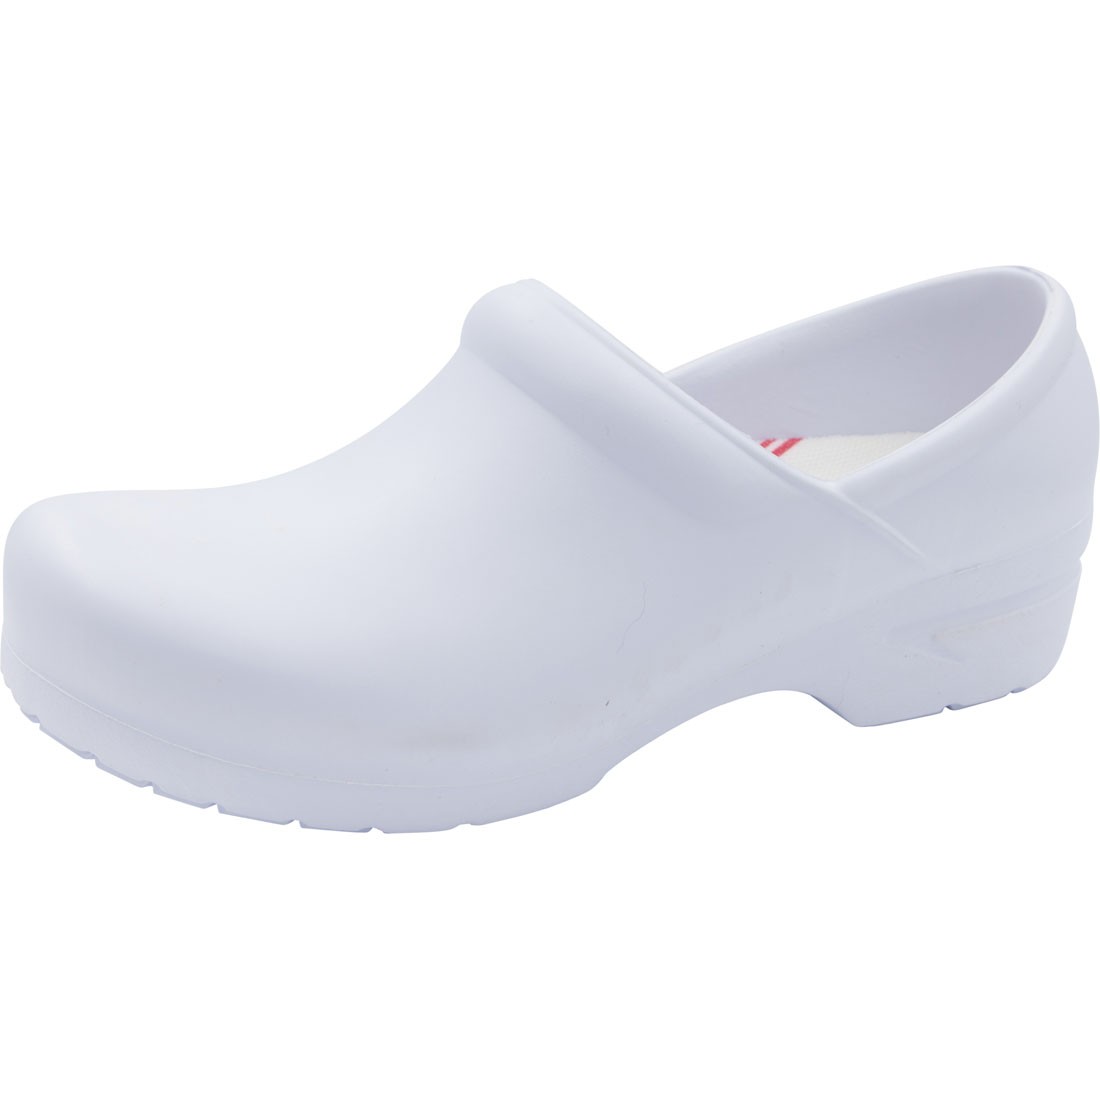 Picture of Anywear Guardianangel Wht 7 Guardianangel protective Plastic Stepin, White - Size 7